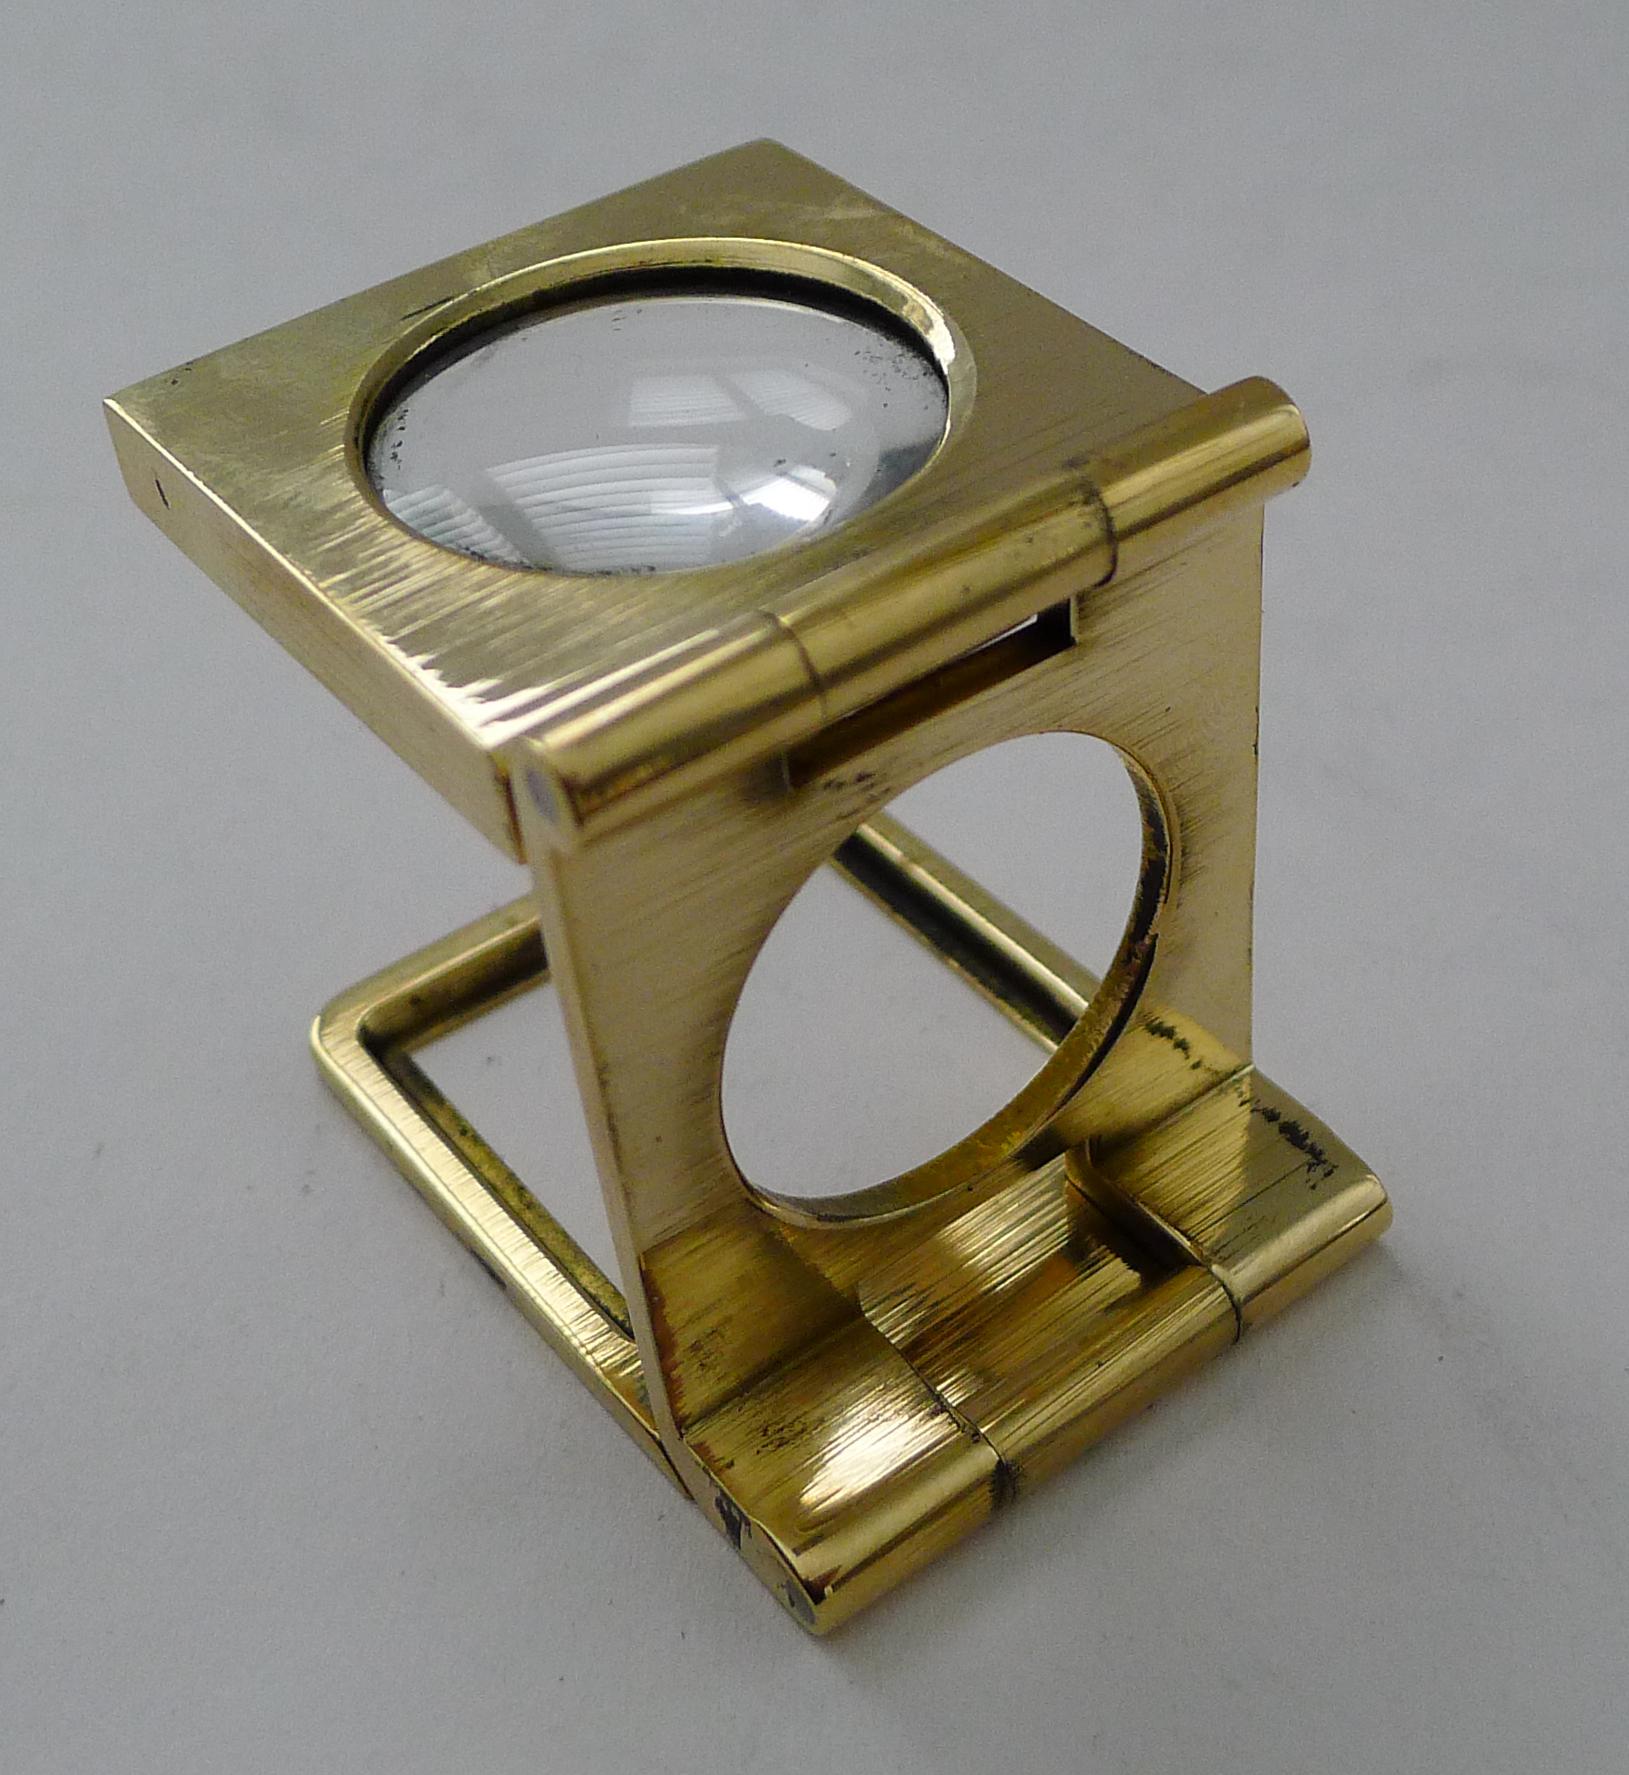 Dating to the early twentieth century, c.1900/1920, this is an antique cast brass linen thread counter, of course usable to magnify whatever you wish.

Heavy solid cast brass with a good undamaged magnifying glass, professionally cleaned and